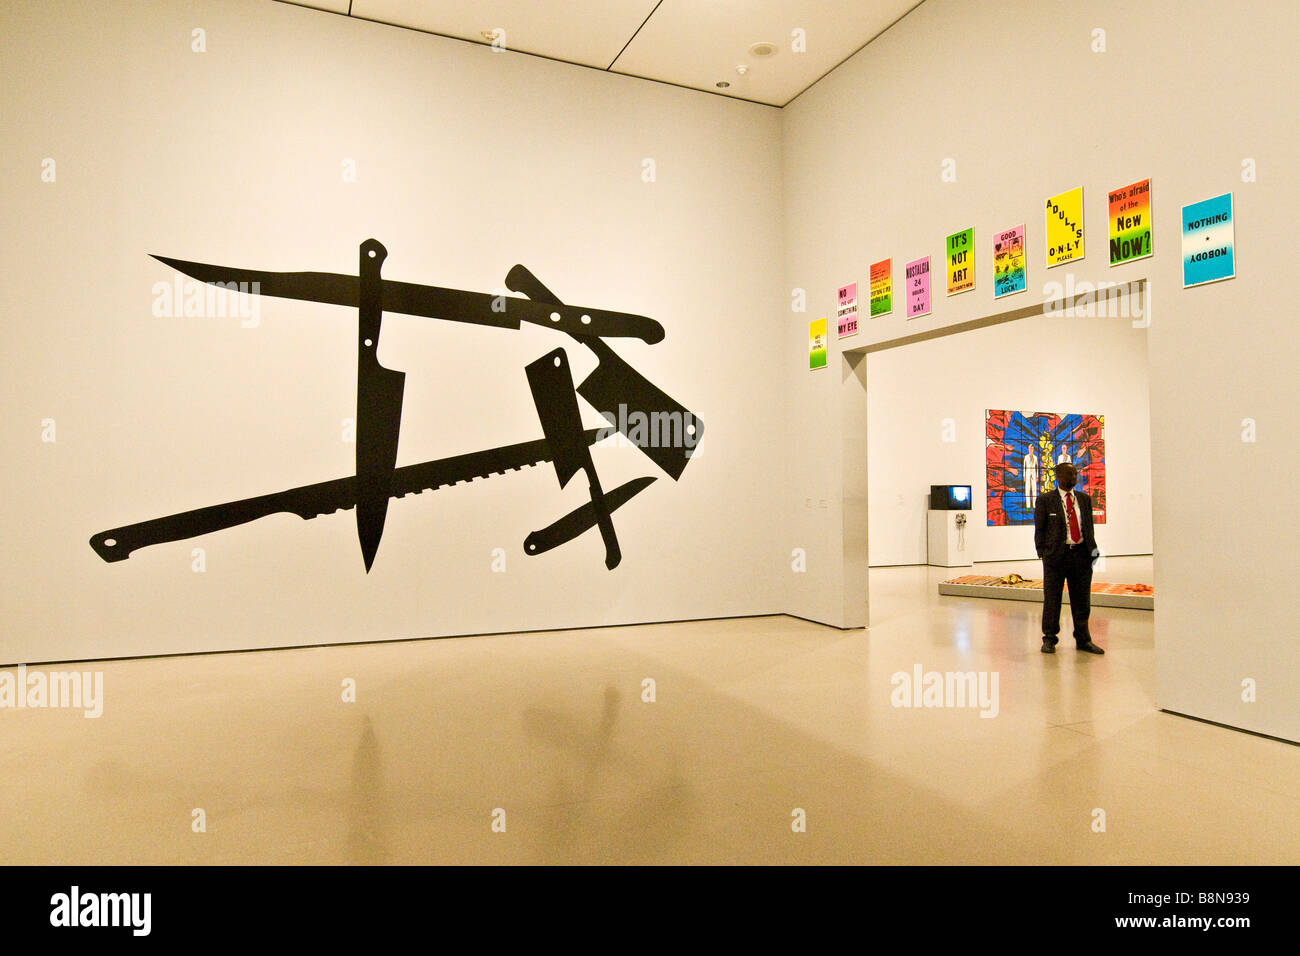 An exhibit at the Museum of modern art Stock Photo